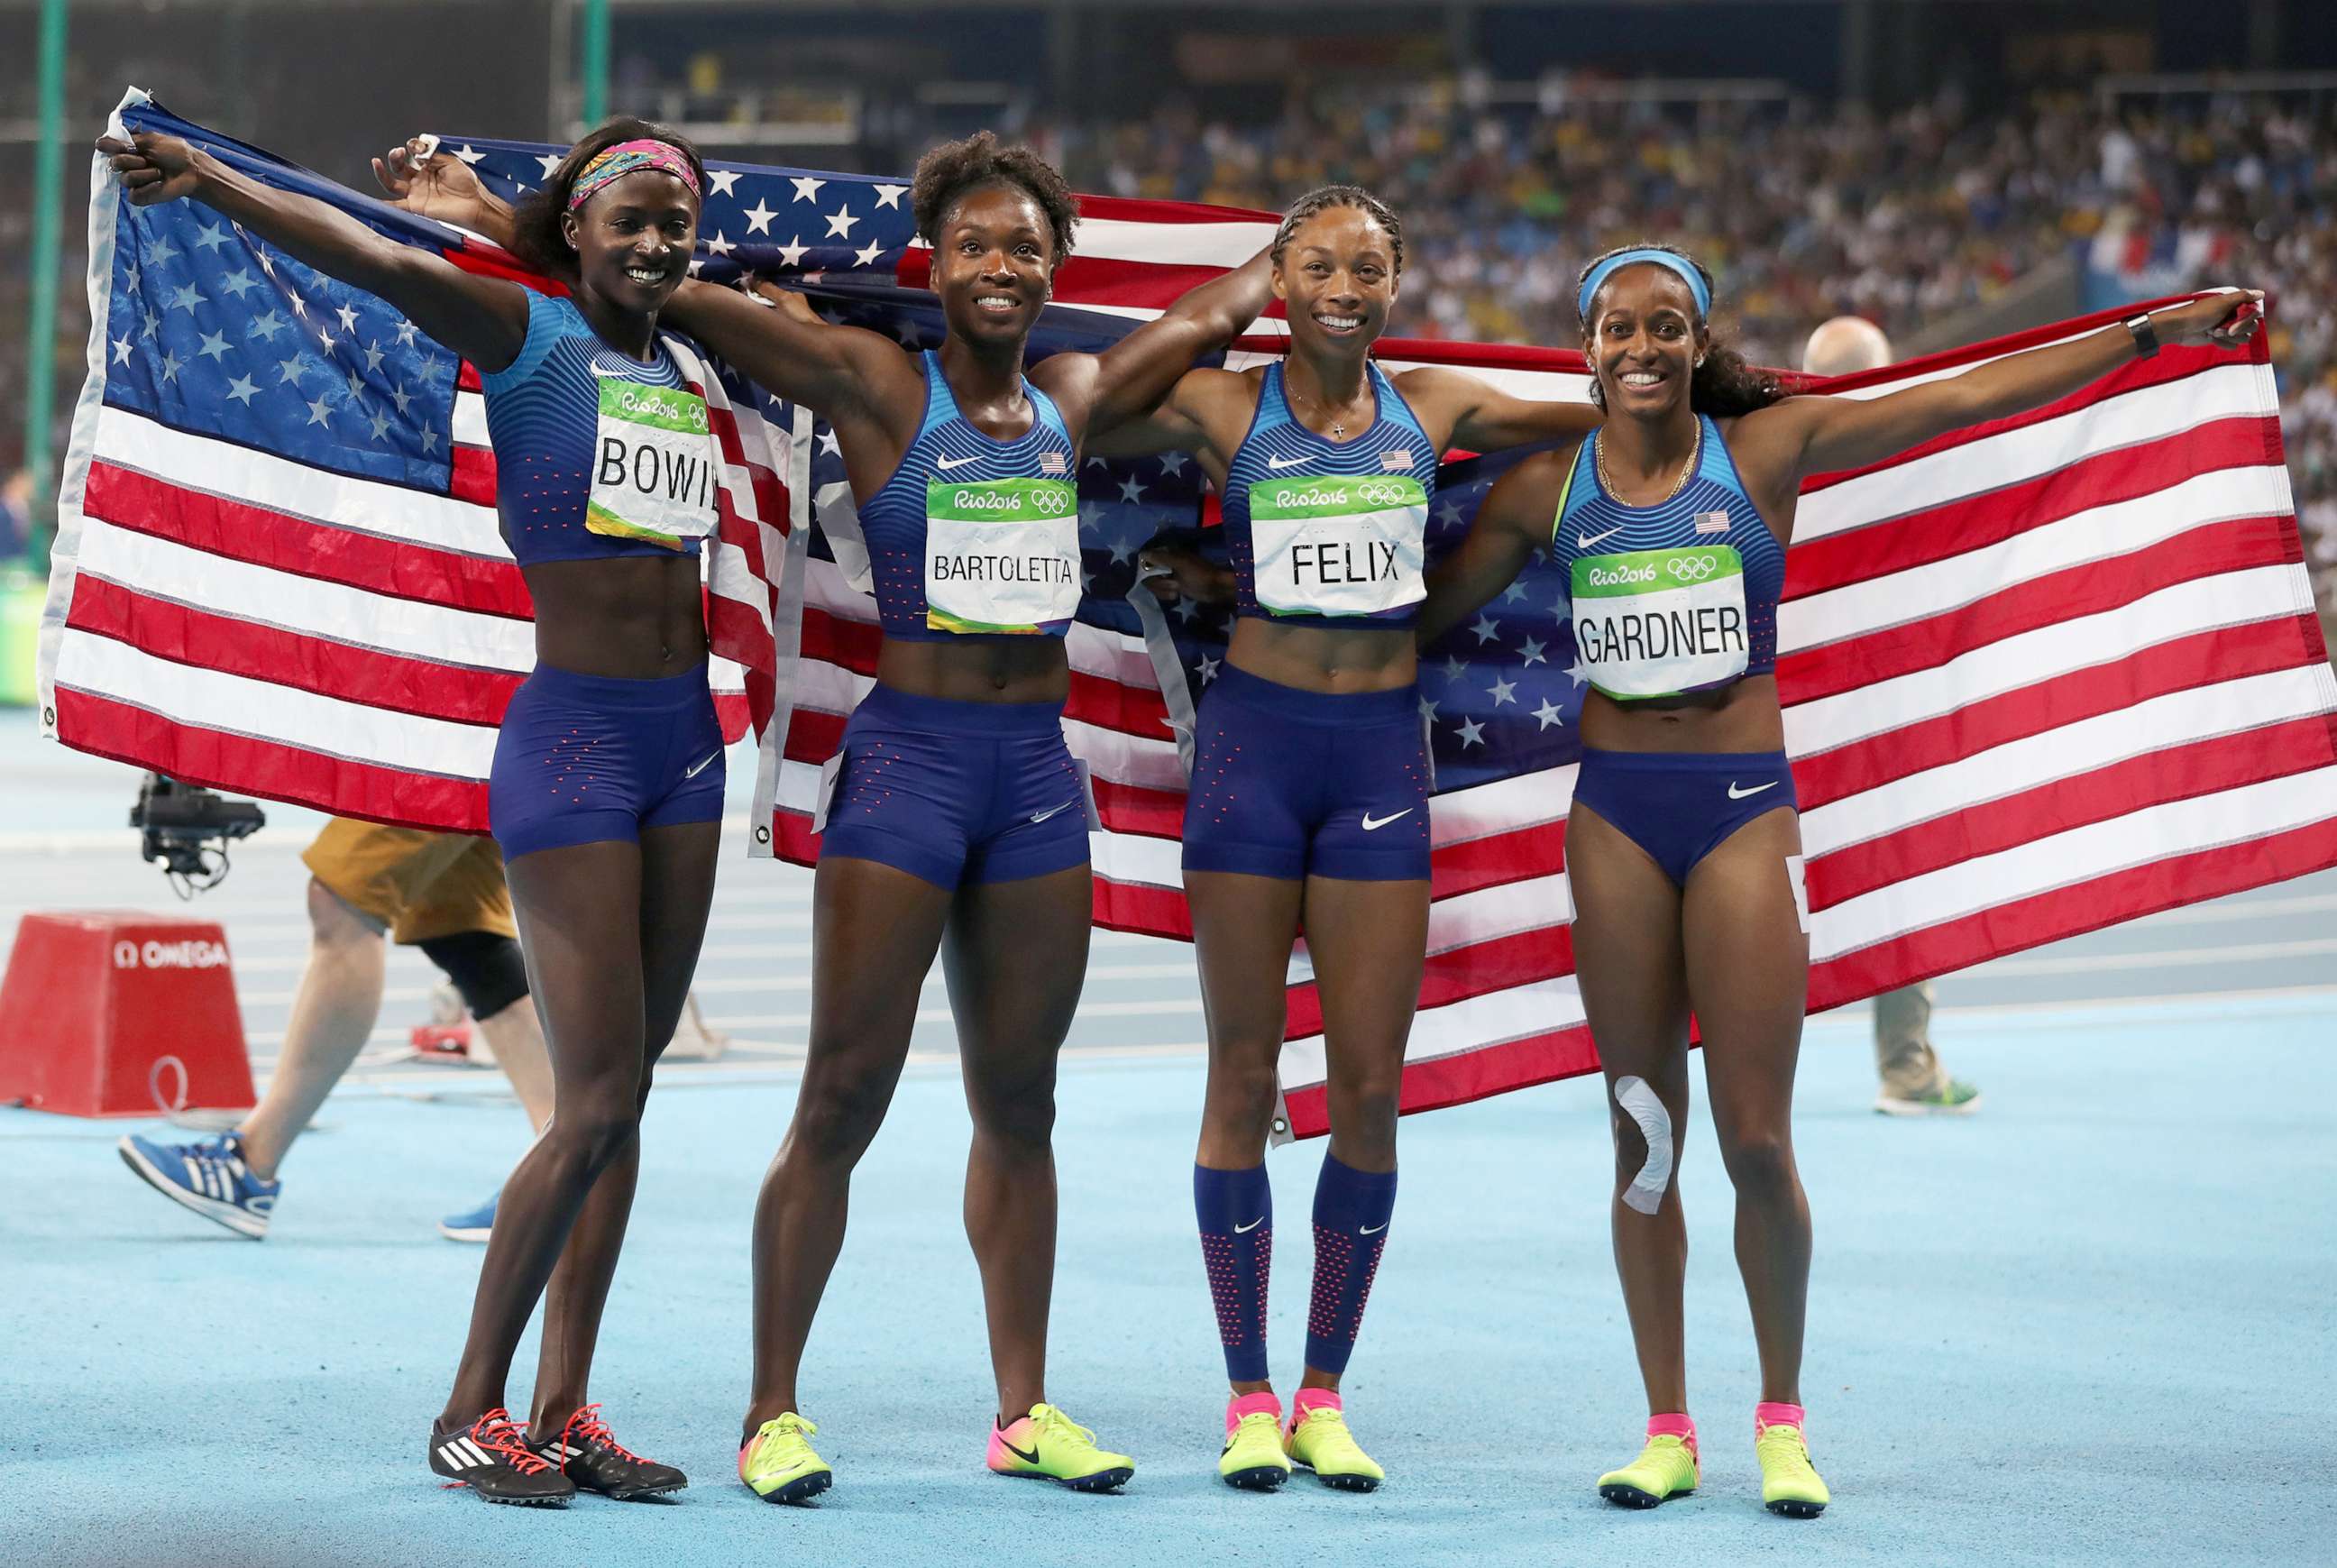 PHOTO: From left, Tori Bowie, Tianna Bartoletta, Allyson Felix and English Gardner of the United States celebrate winning gold in the Women's 4 x 100m Relay Final on Day 14 of the Rio 2016 Olympic Games, Aug. 19, 2016, in Rio de Janeiro.